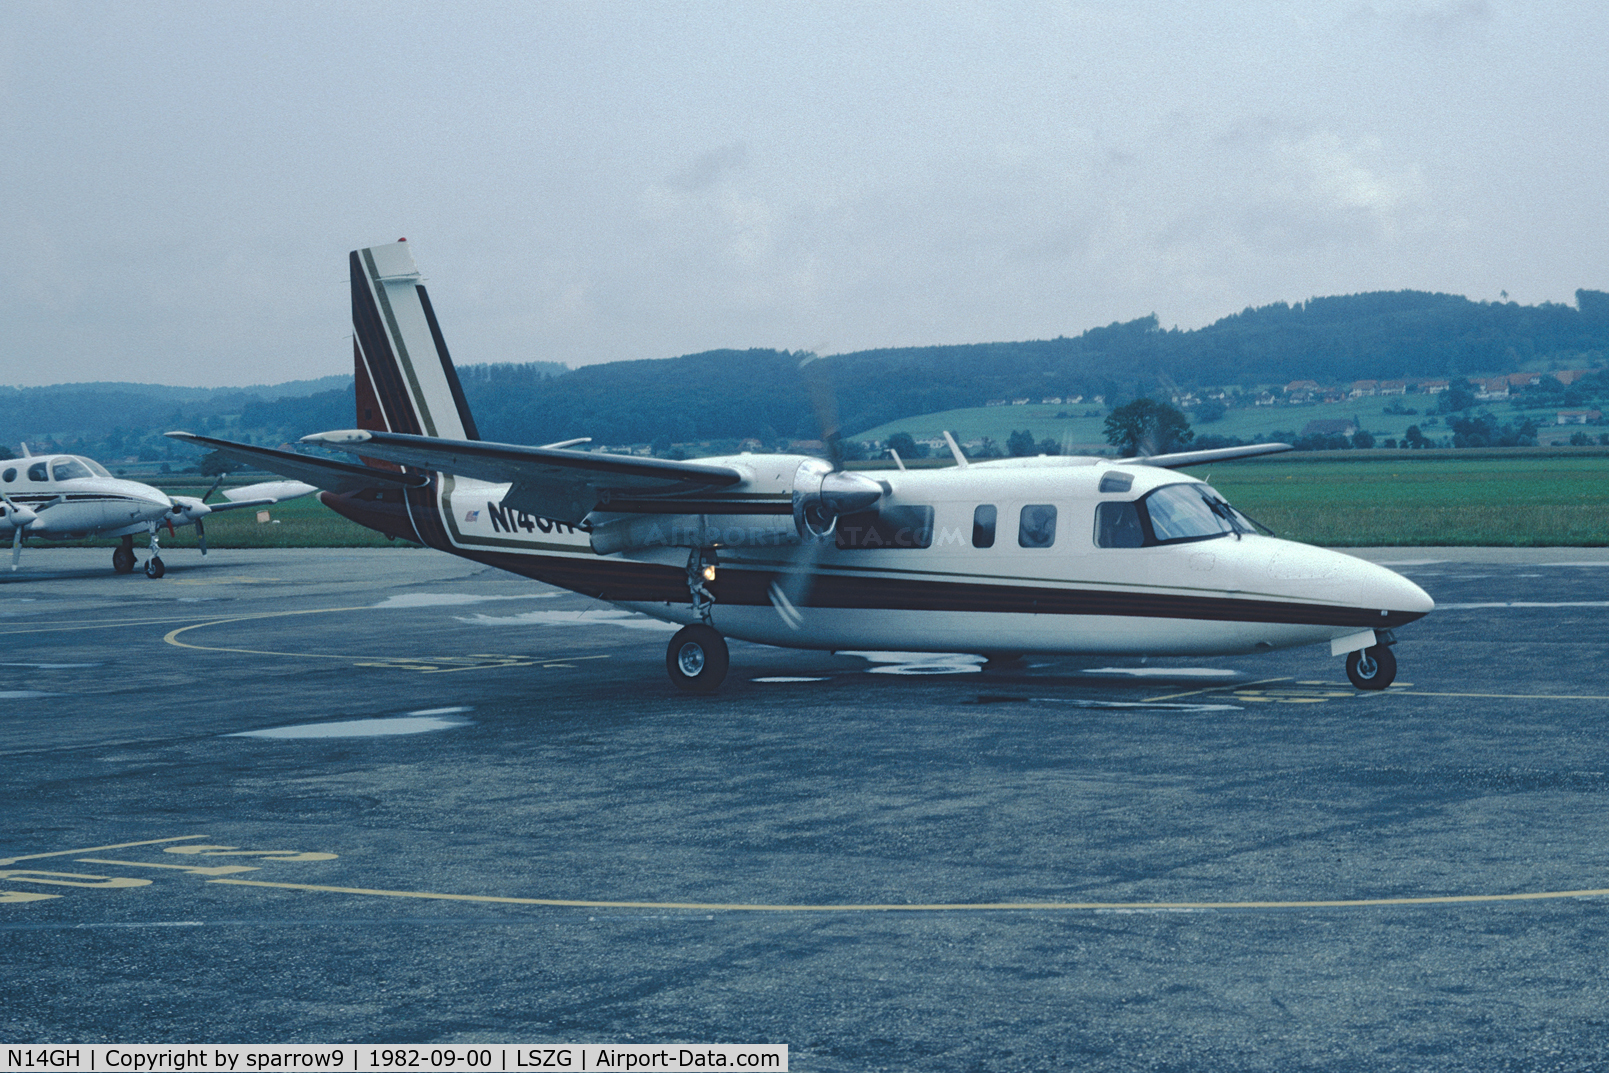 N14GH, 1975 Rockwell 690A Turbo Commander Turbo Commander C/N 11255, Deregistered to Colombia. At Grenchen airport. Scanned from a slide.